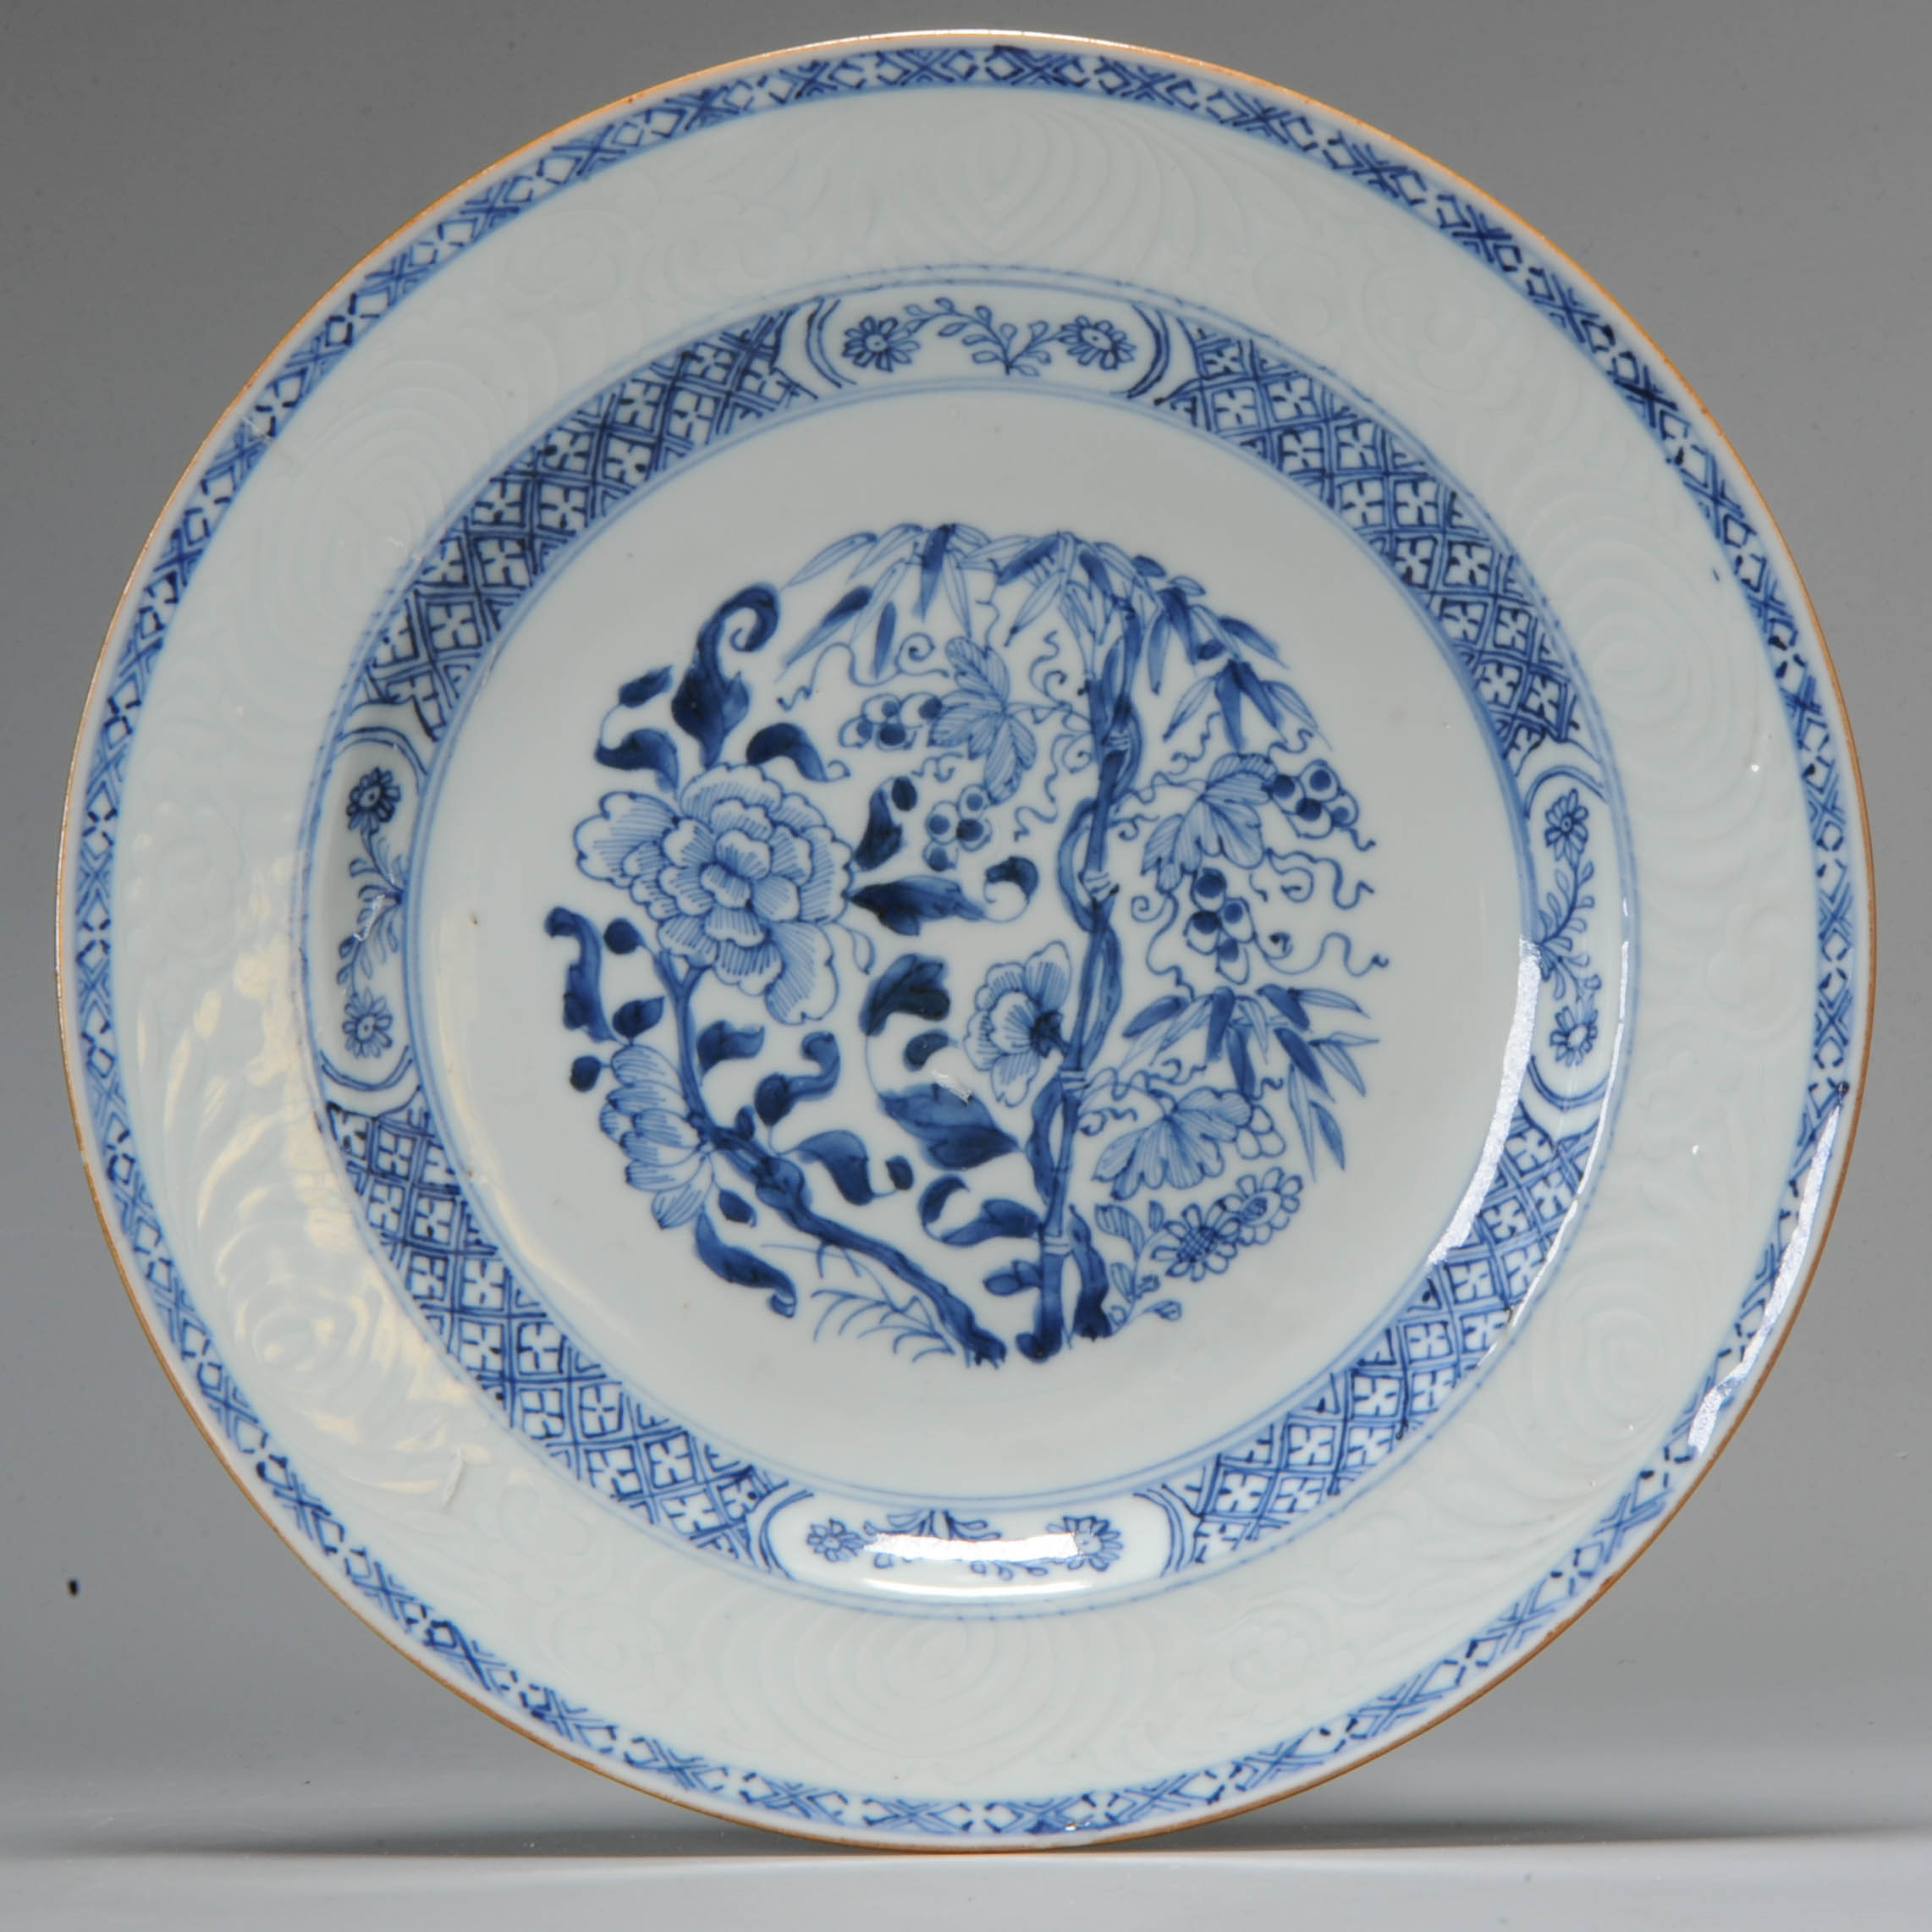 1004 Lovely pencilled plate with Anhua border. Very rare. Typical for the Yongzheng period